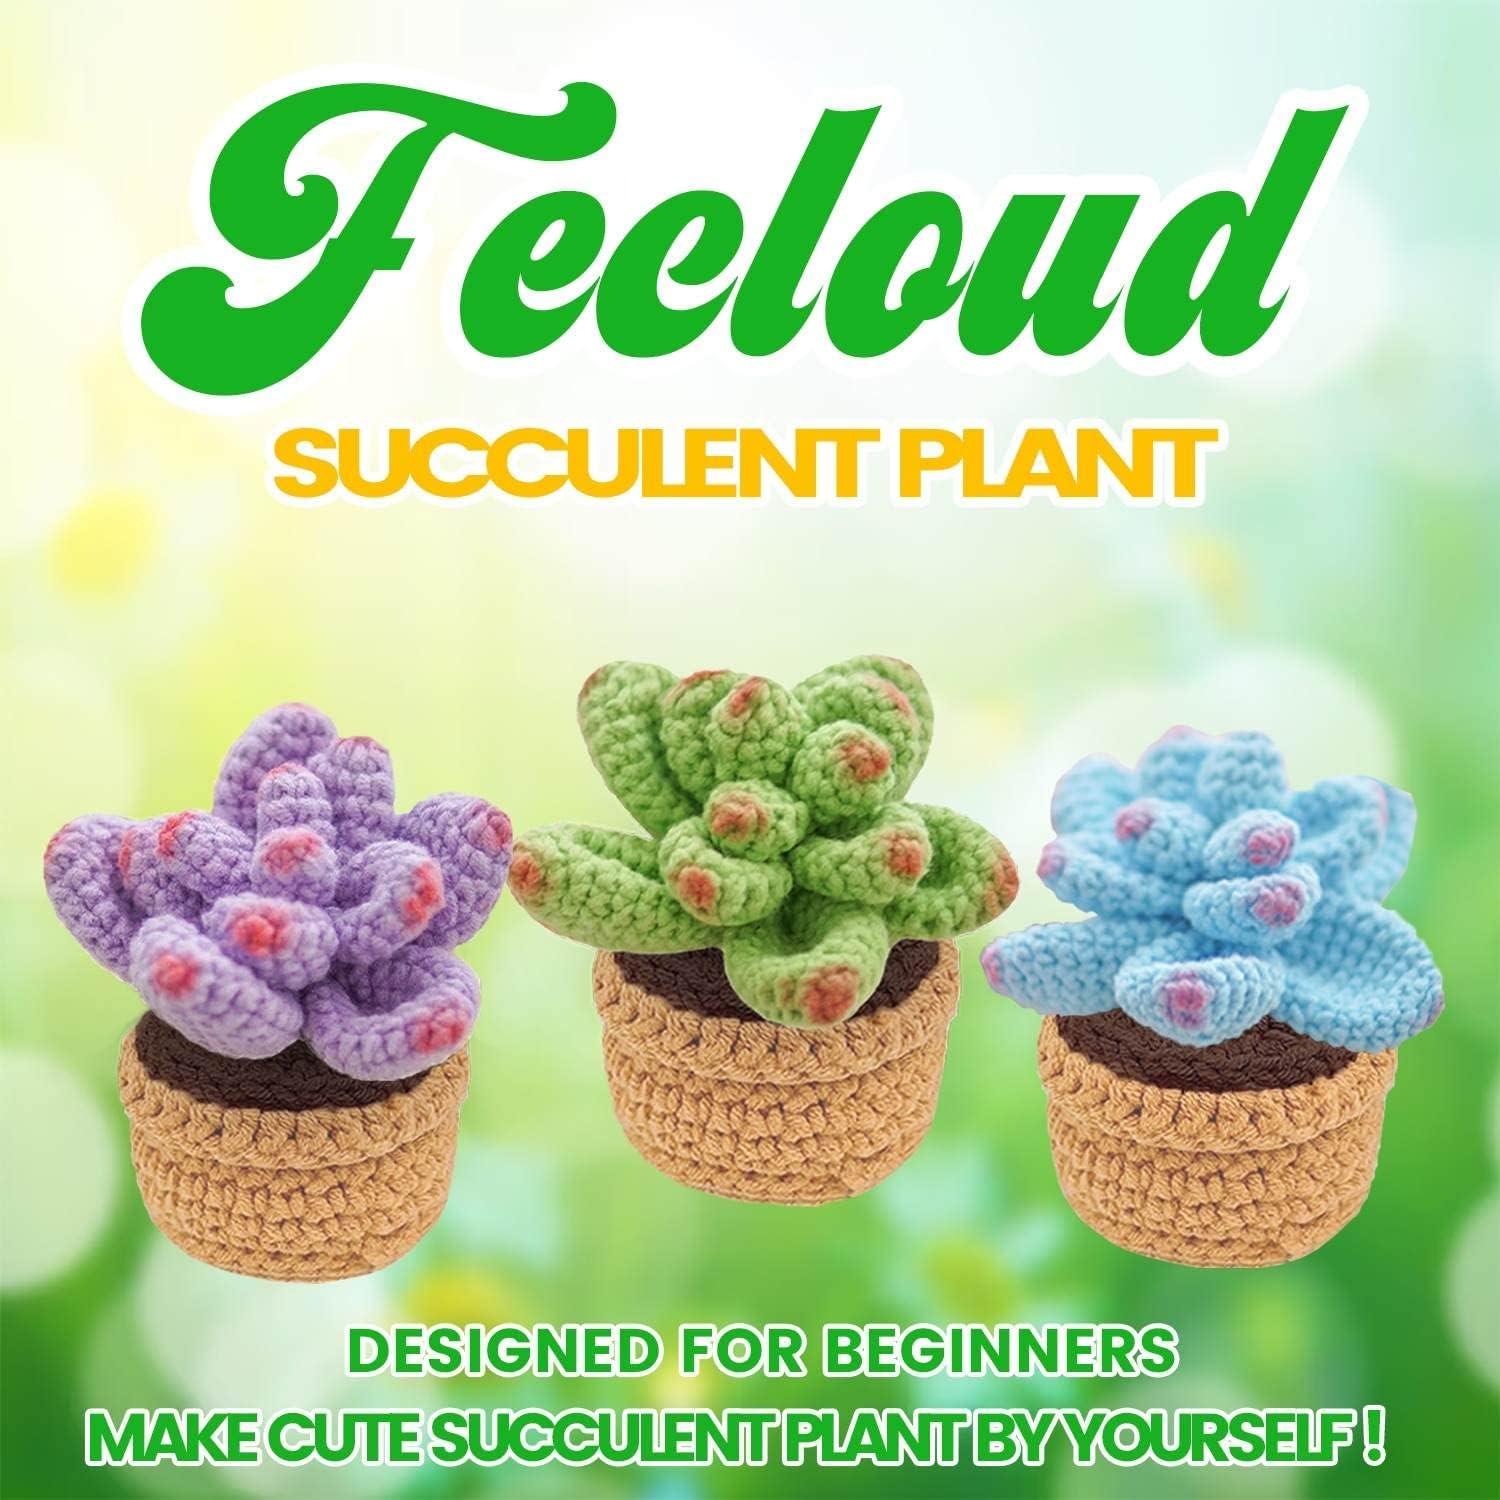 Crochet Kit for Beginners - 4Pcs Succulents for Adults, Crocheting Knitting  Kit with Step-by-Step Video Tutorials